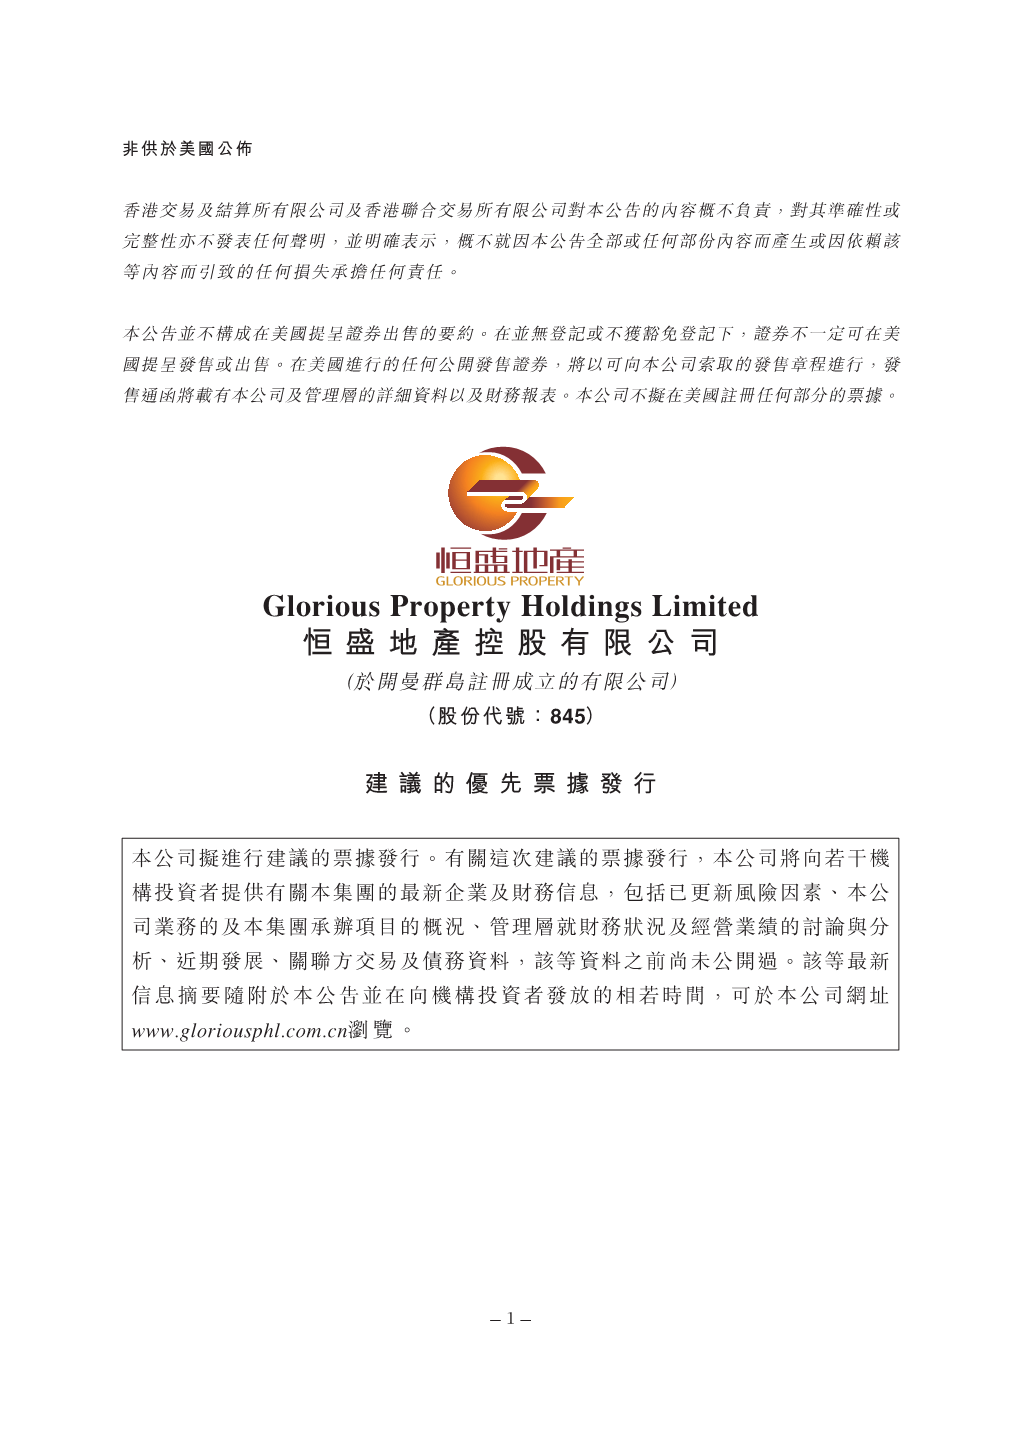 Glorious Property Holdings Limited 囱 盛 地 產 控 股 有 限